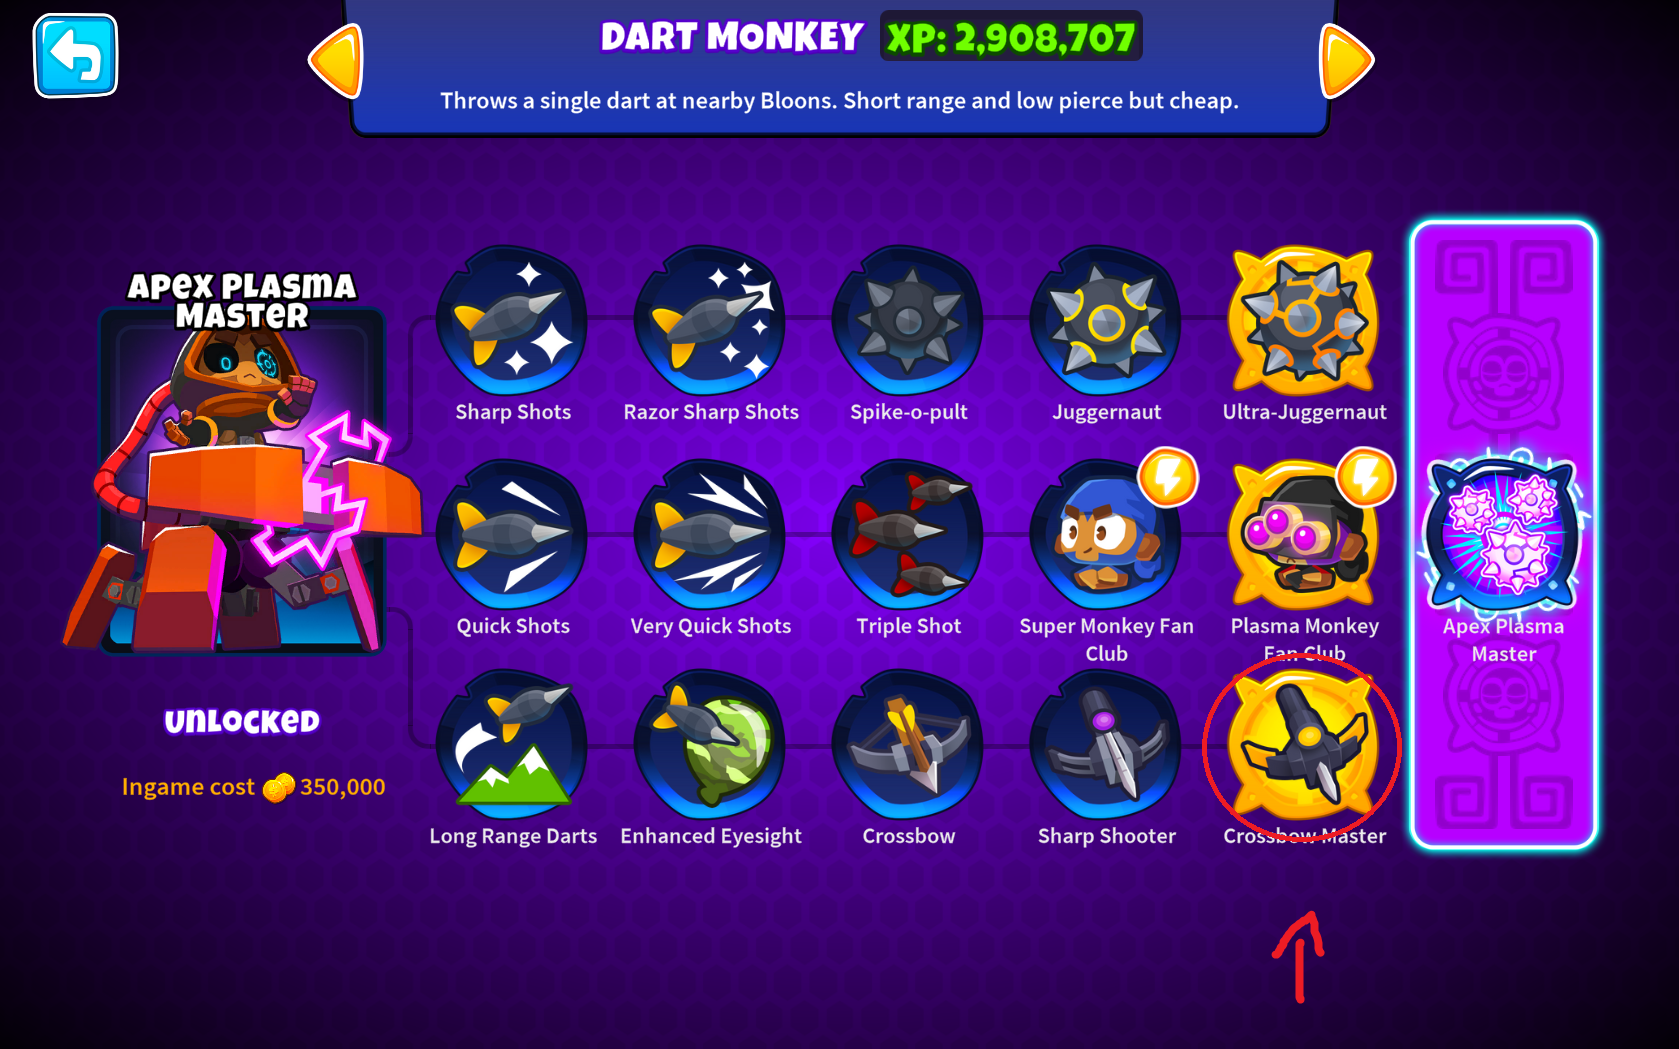 epic btd6 guide so epic you will die from how epic it is image 1